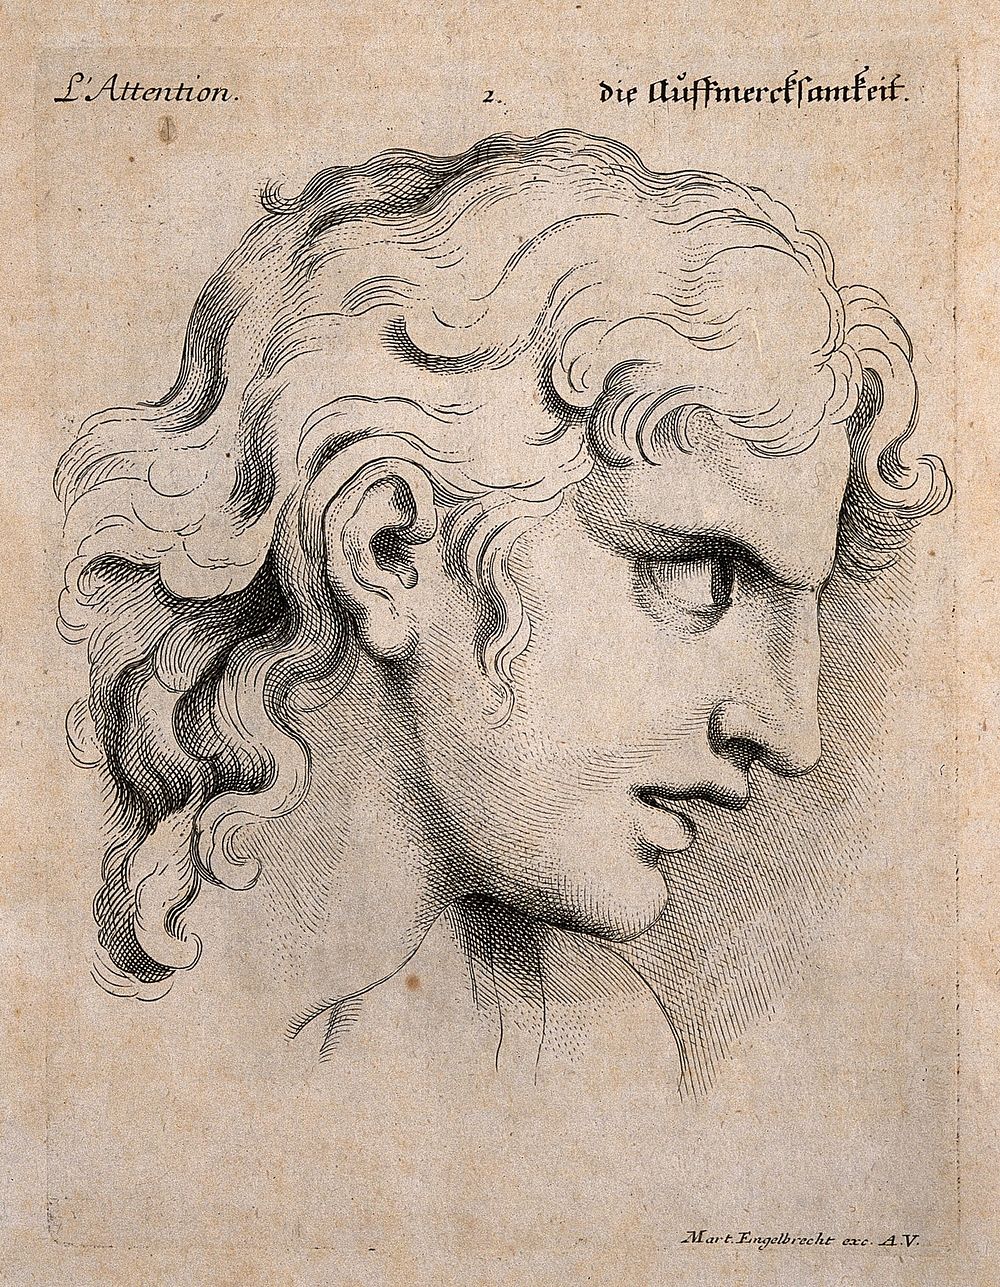 The face of a young man in a state of attention. Engraving by M. Engelbrecht, 1732, after C. Le Brun.